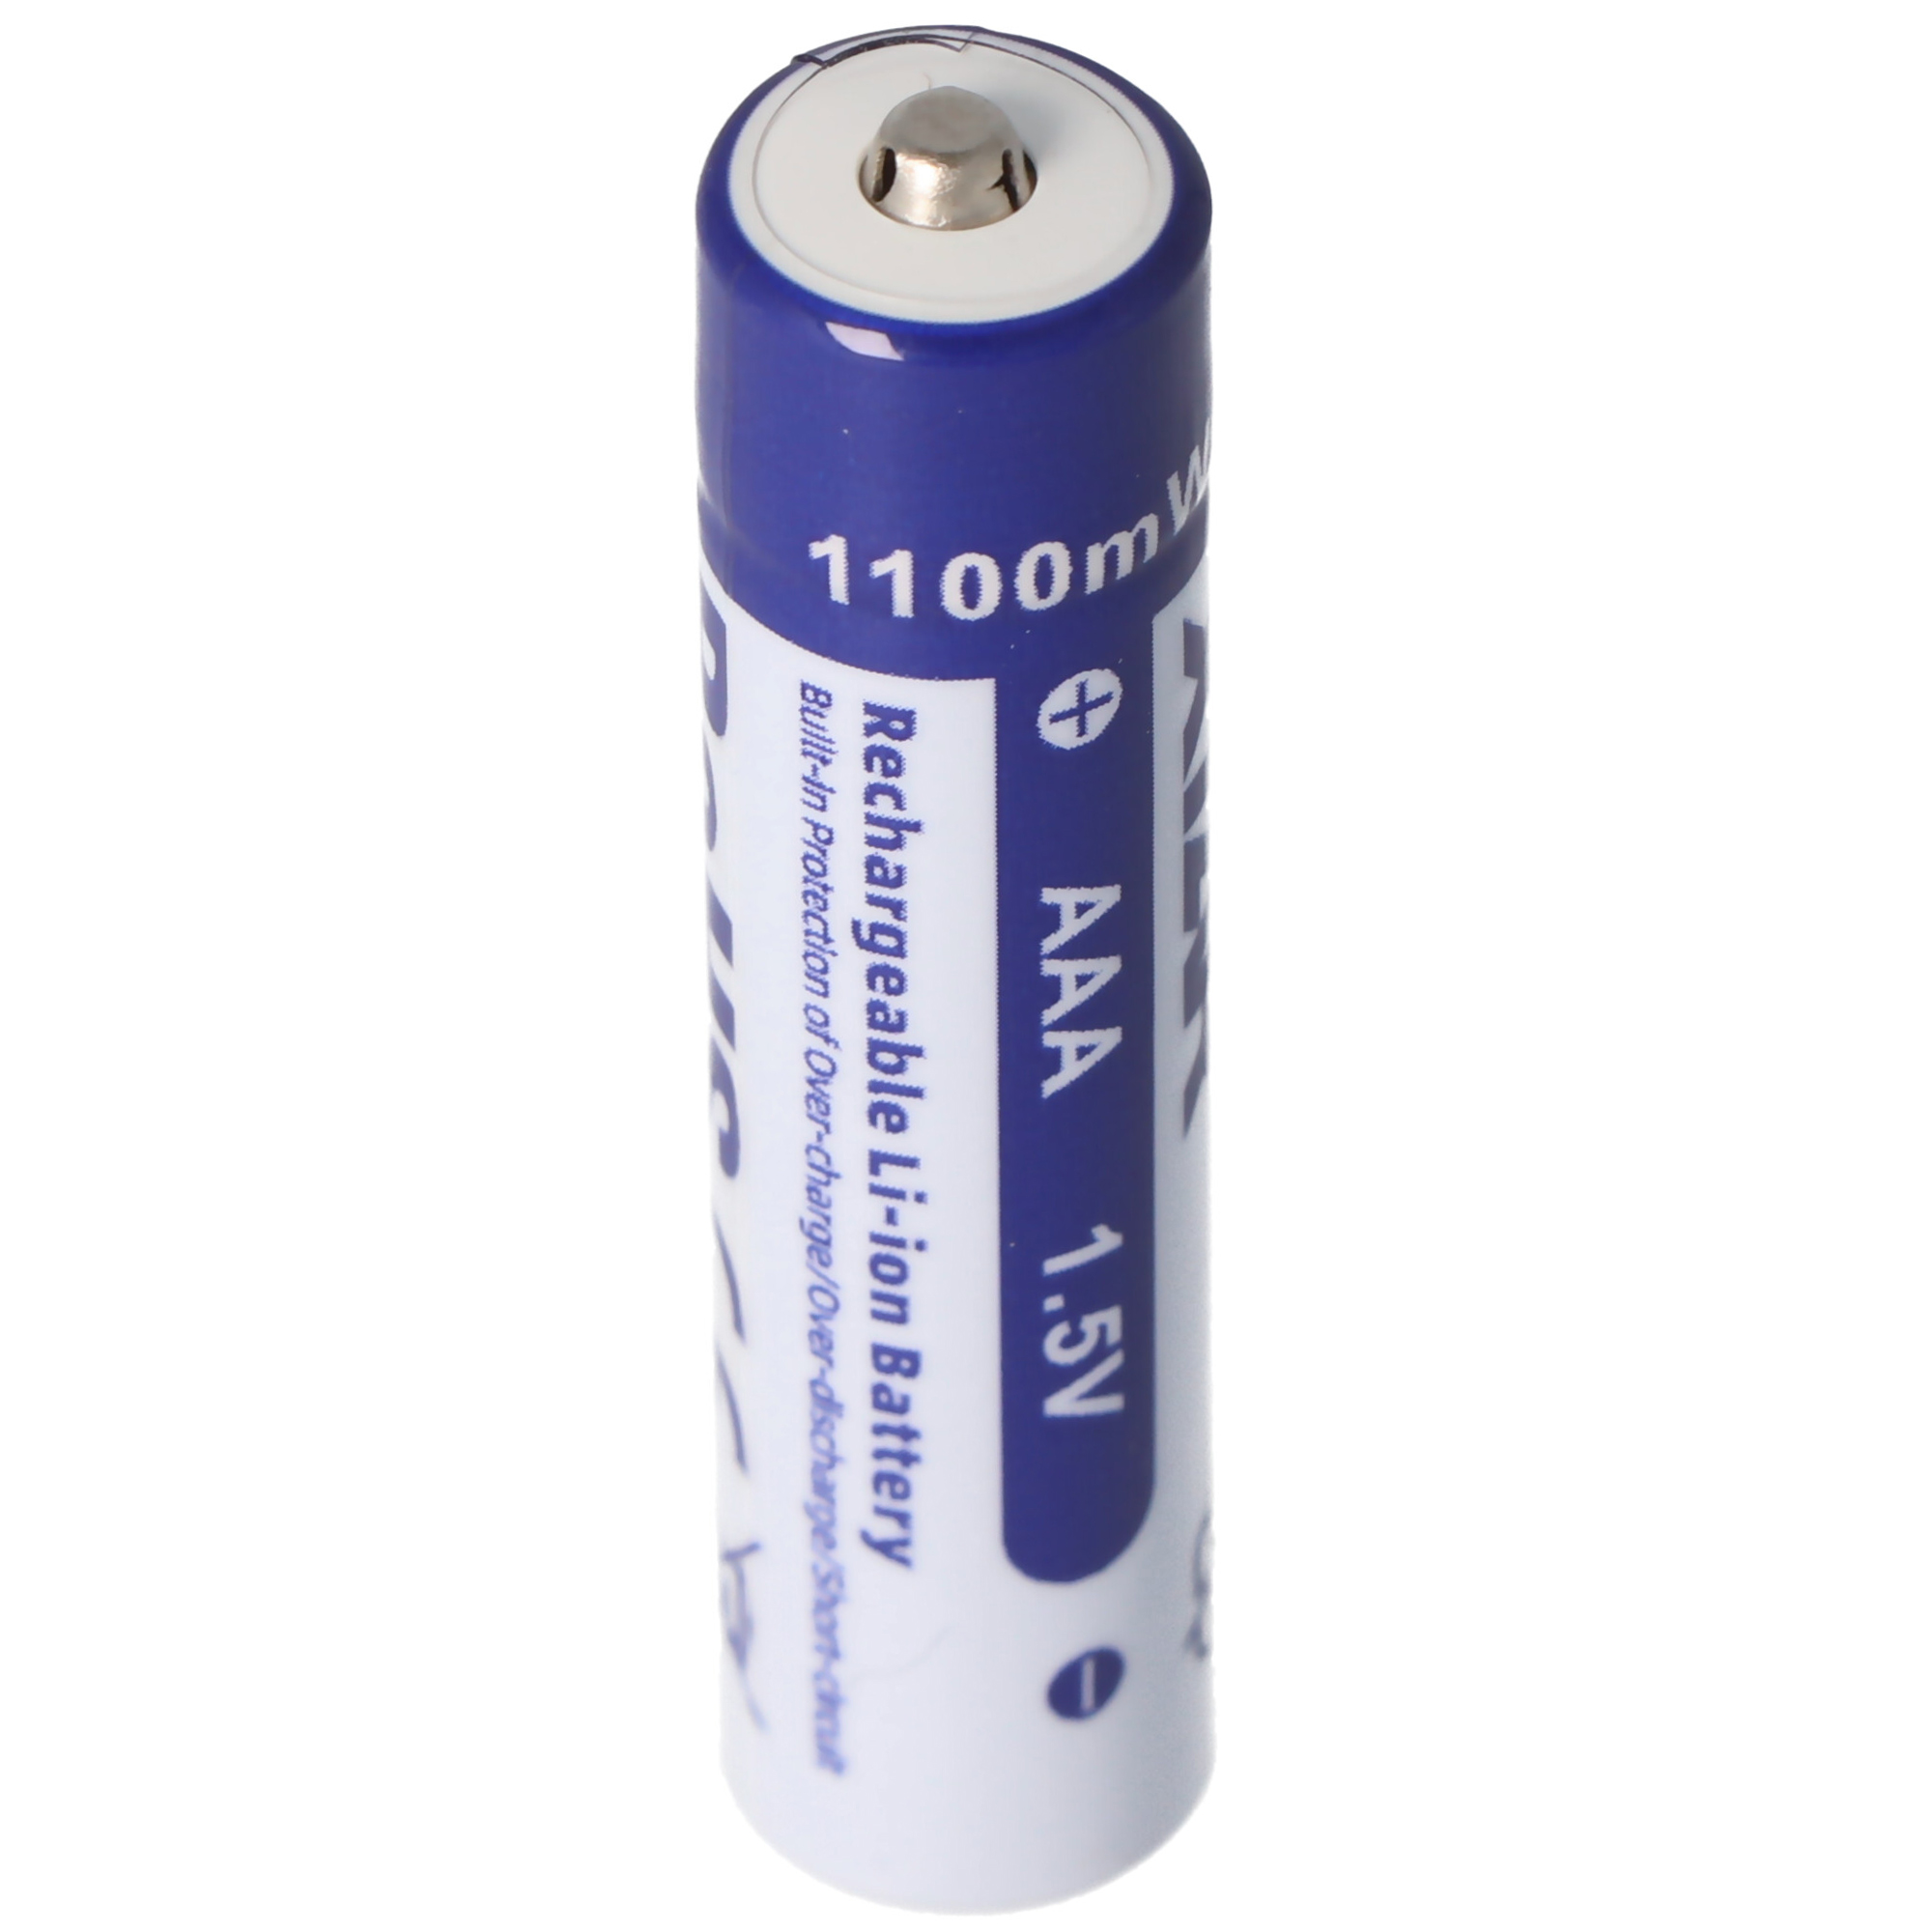 Batterie lithium-ion AAA 1.5V 1100mWh - 700mAh rechargeable